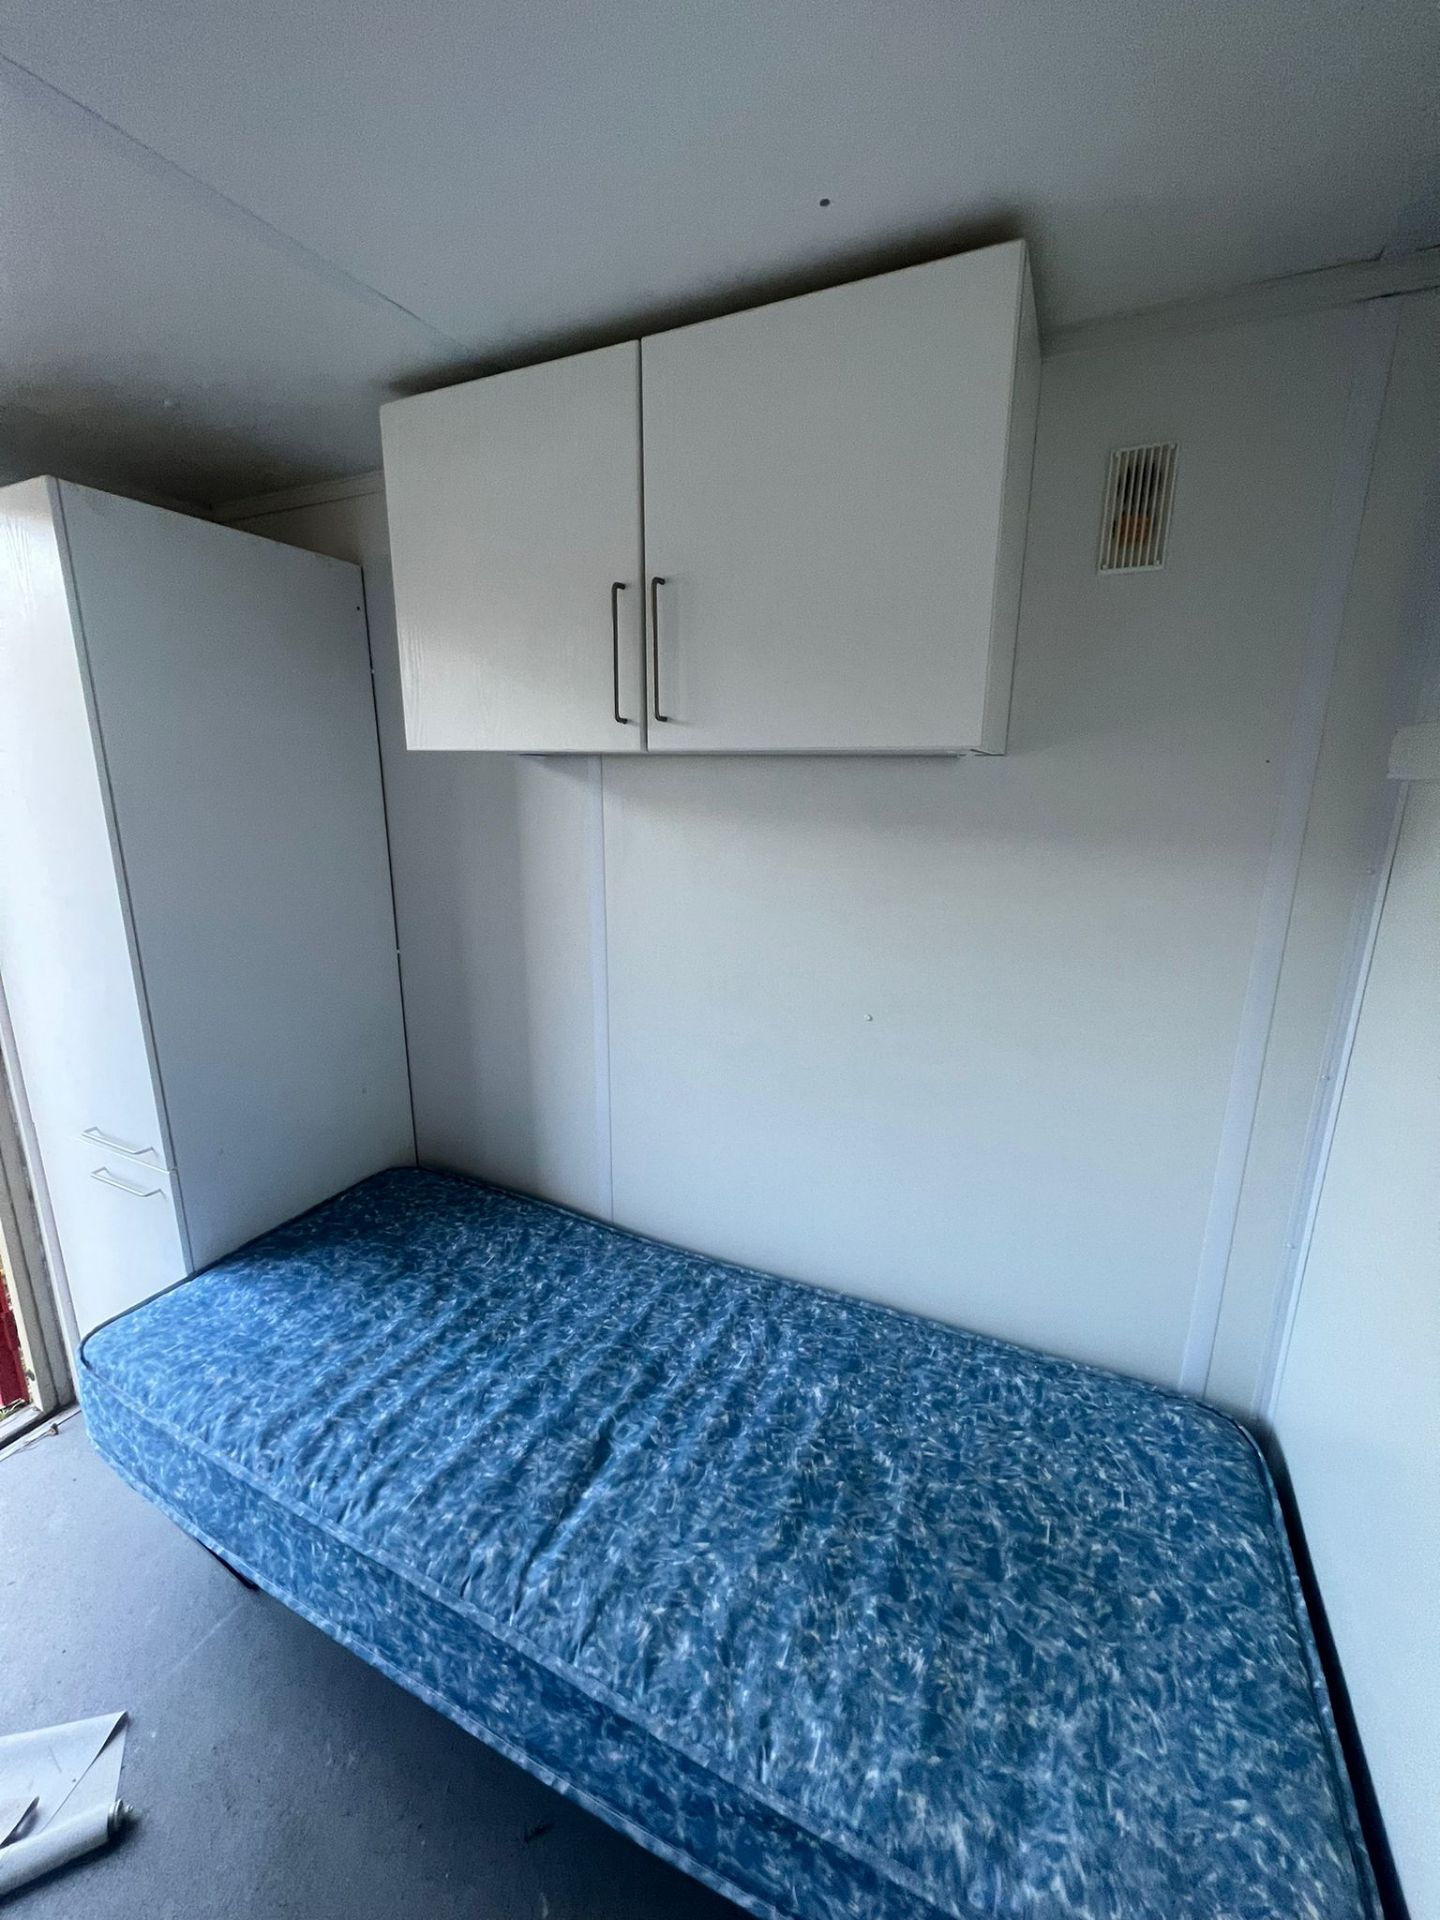 2 birth sleeper cabin office with toilet and shower - Image 11 of 13